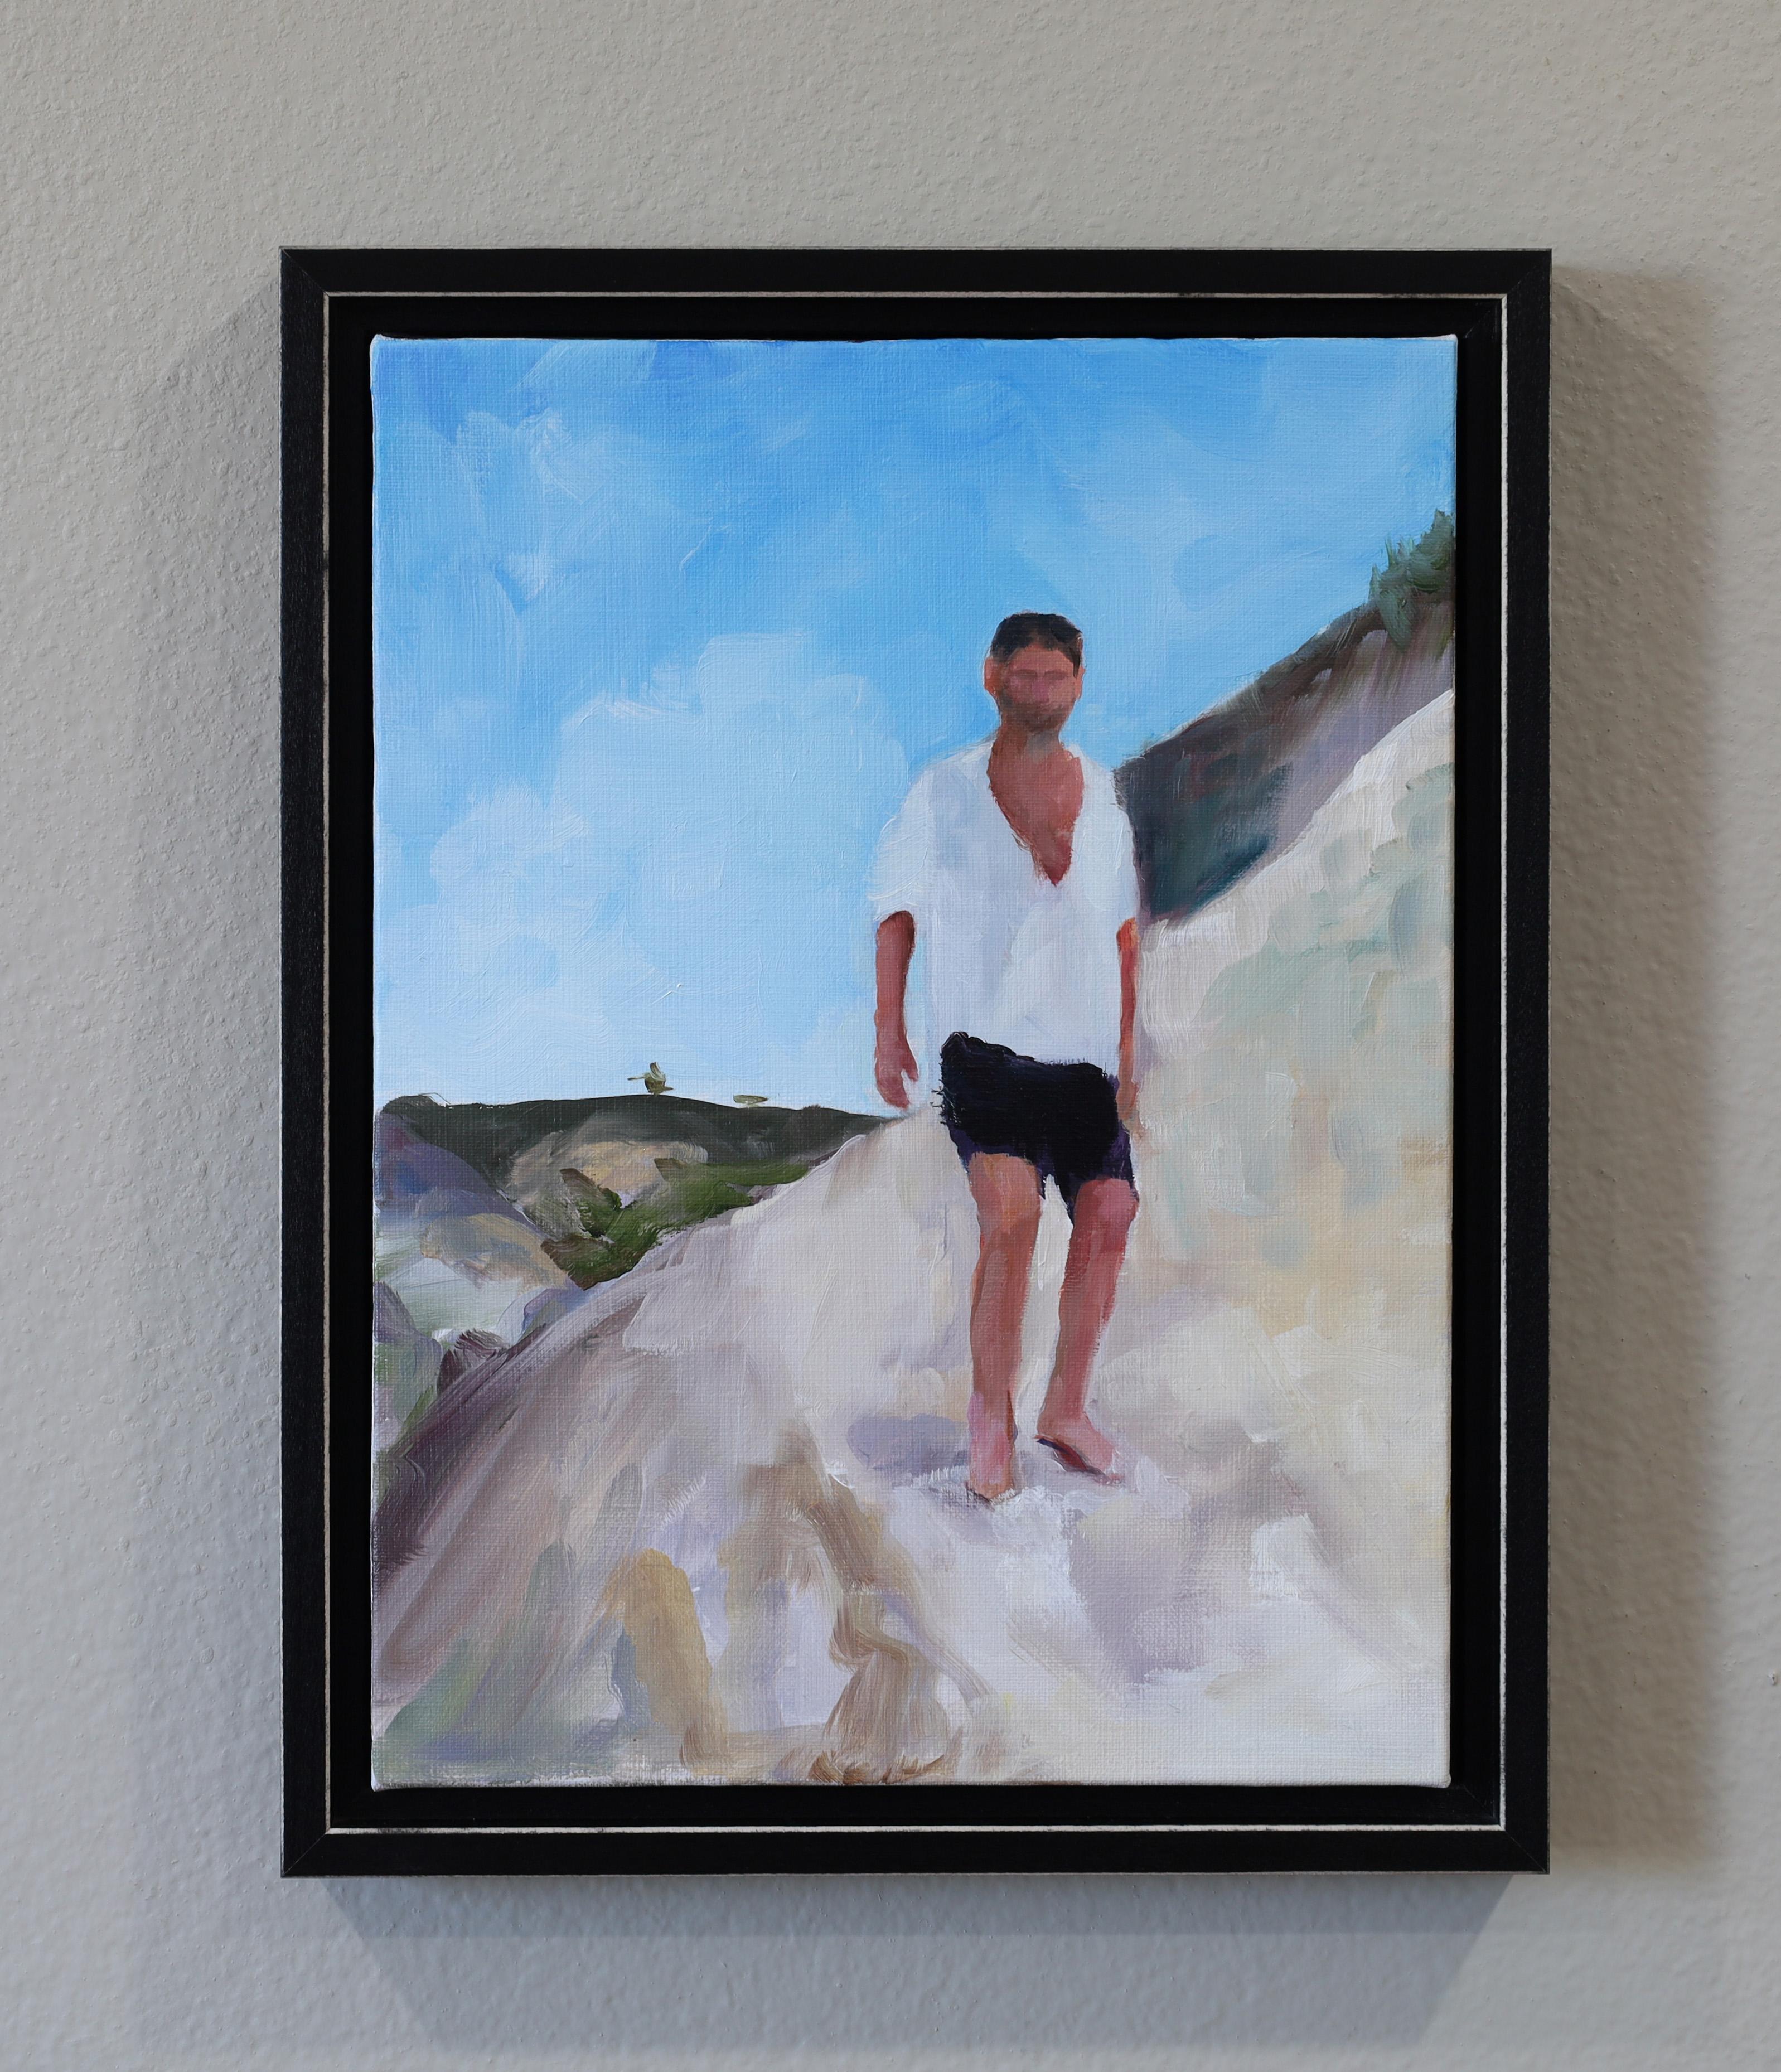 Using the striking imagery that is abundant in the California landscape, queer artist Kory Alexander creates dreamy paintings that are flooded with vibrancy and movement. Kory considers himself a naturally curious person, and a wallflower at heart.